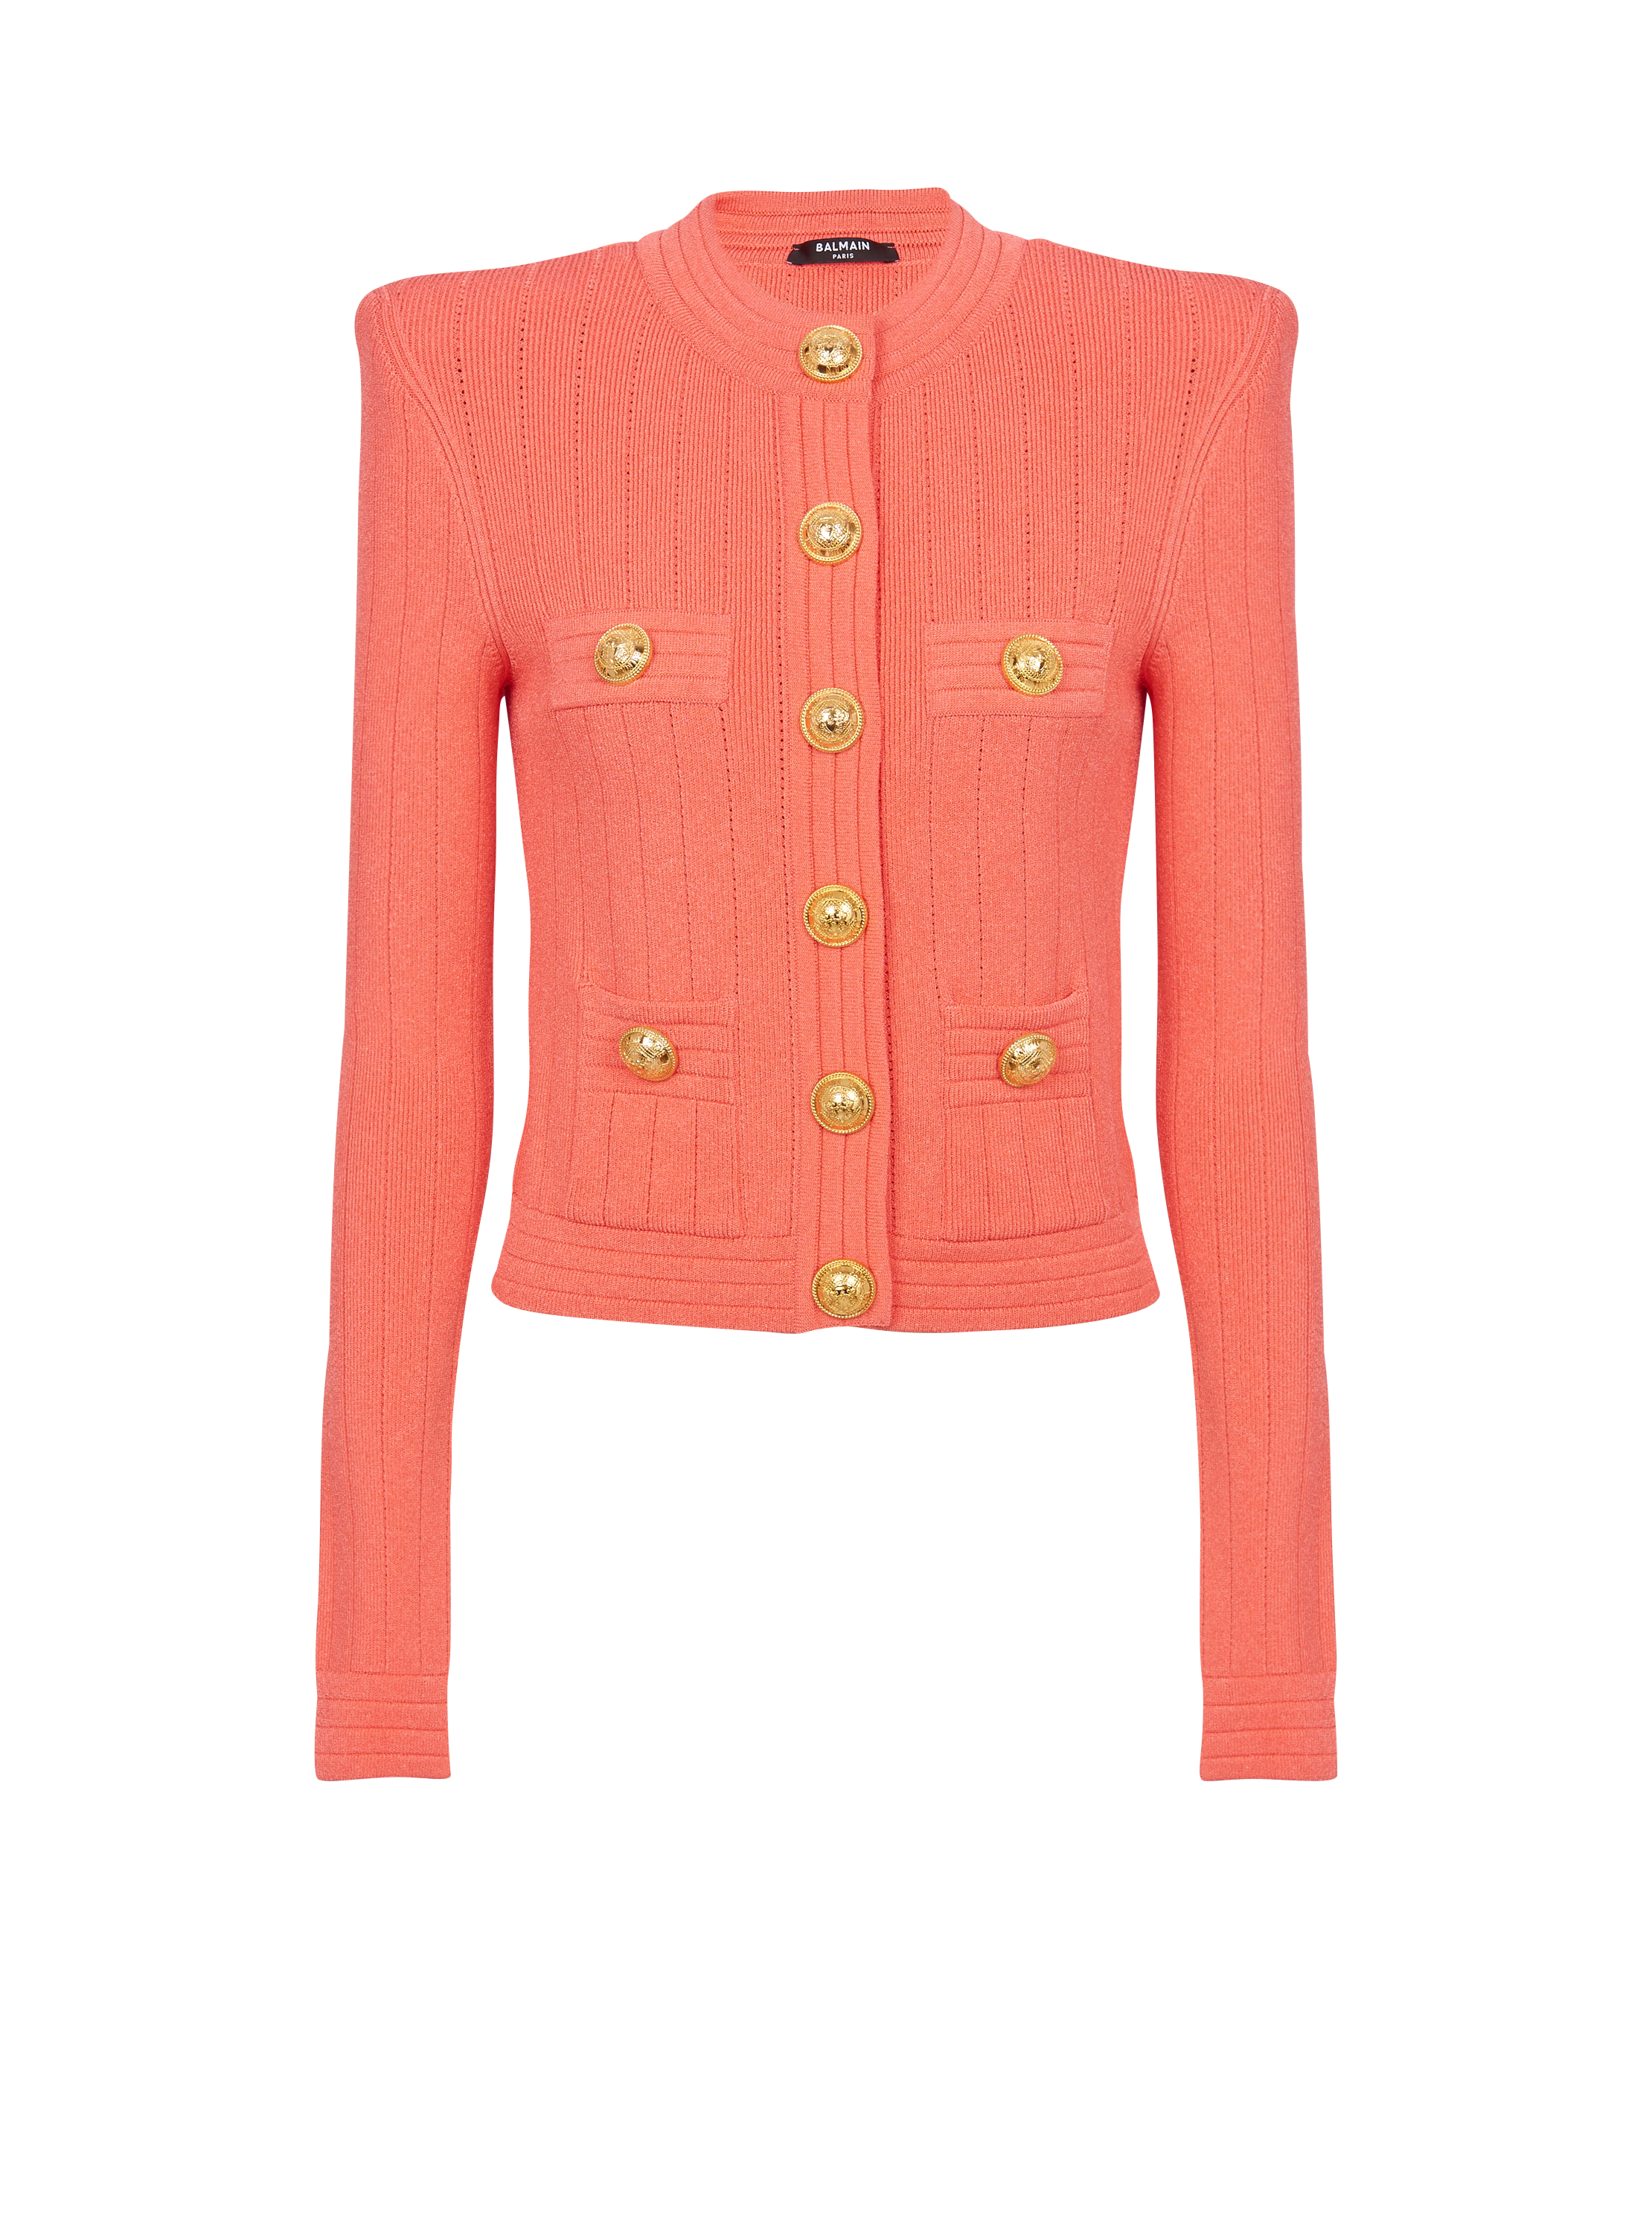 Buttoned fine knit cardigan, pink, hi-res